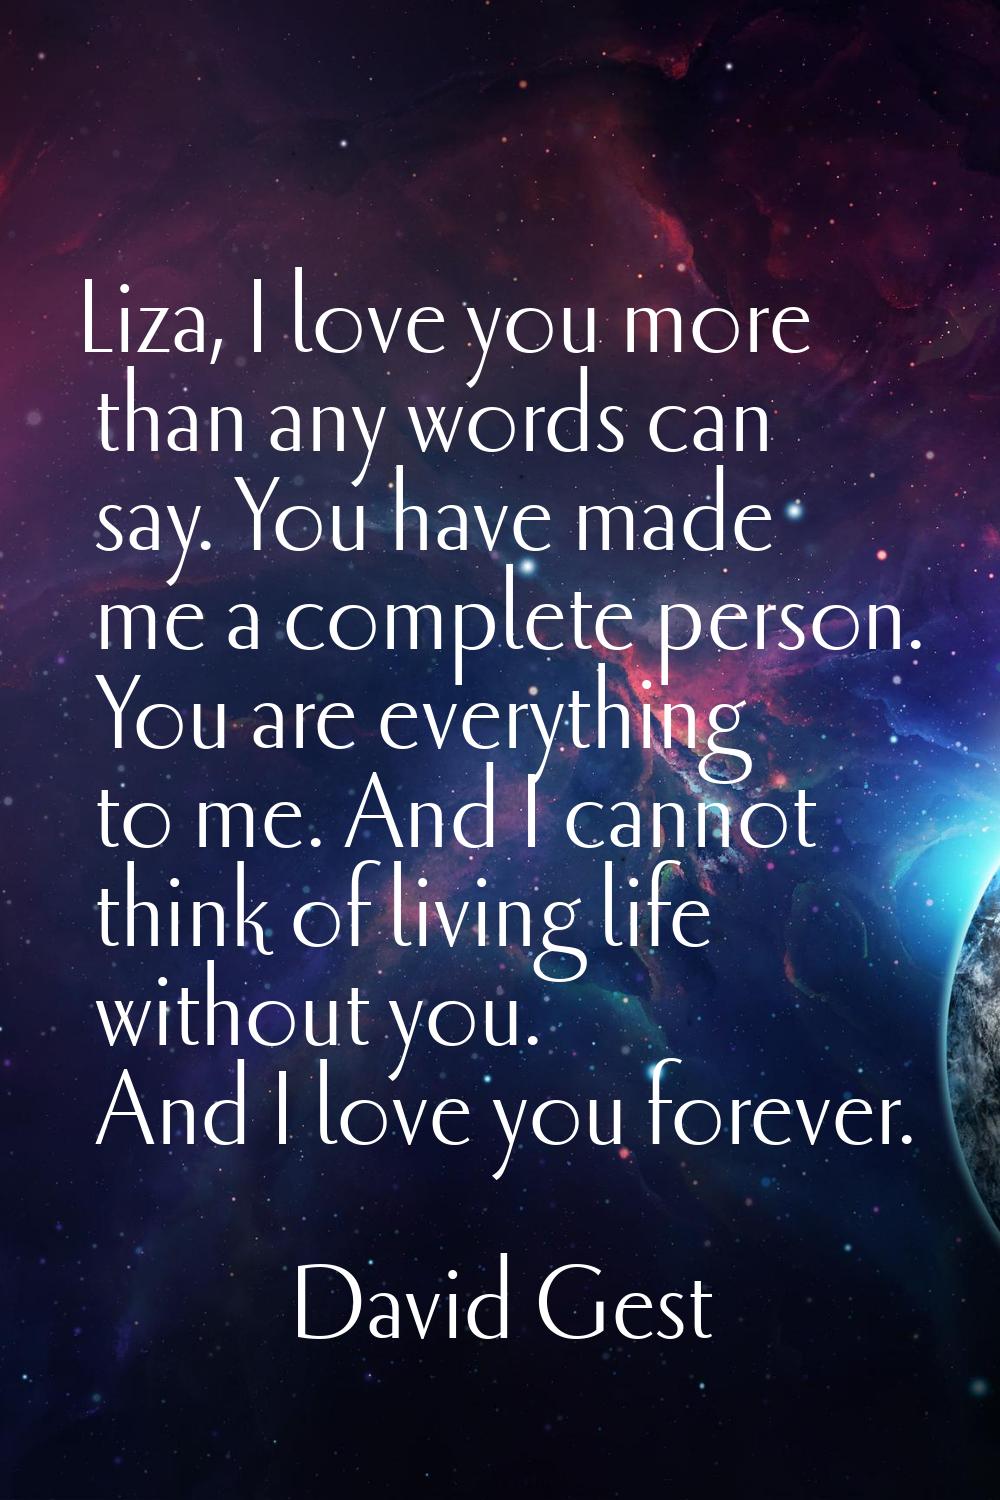 Liza, I love you more than any words can say. You have made me a complete person. You are everythin